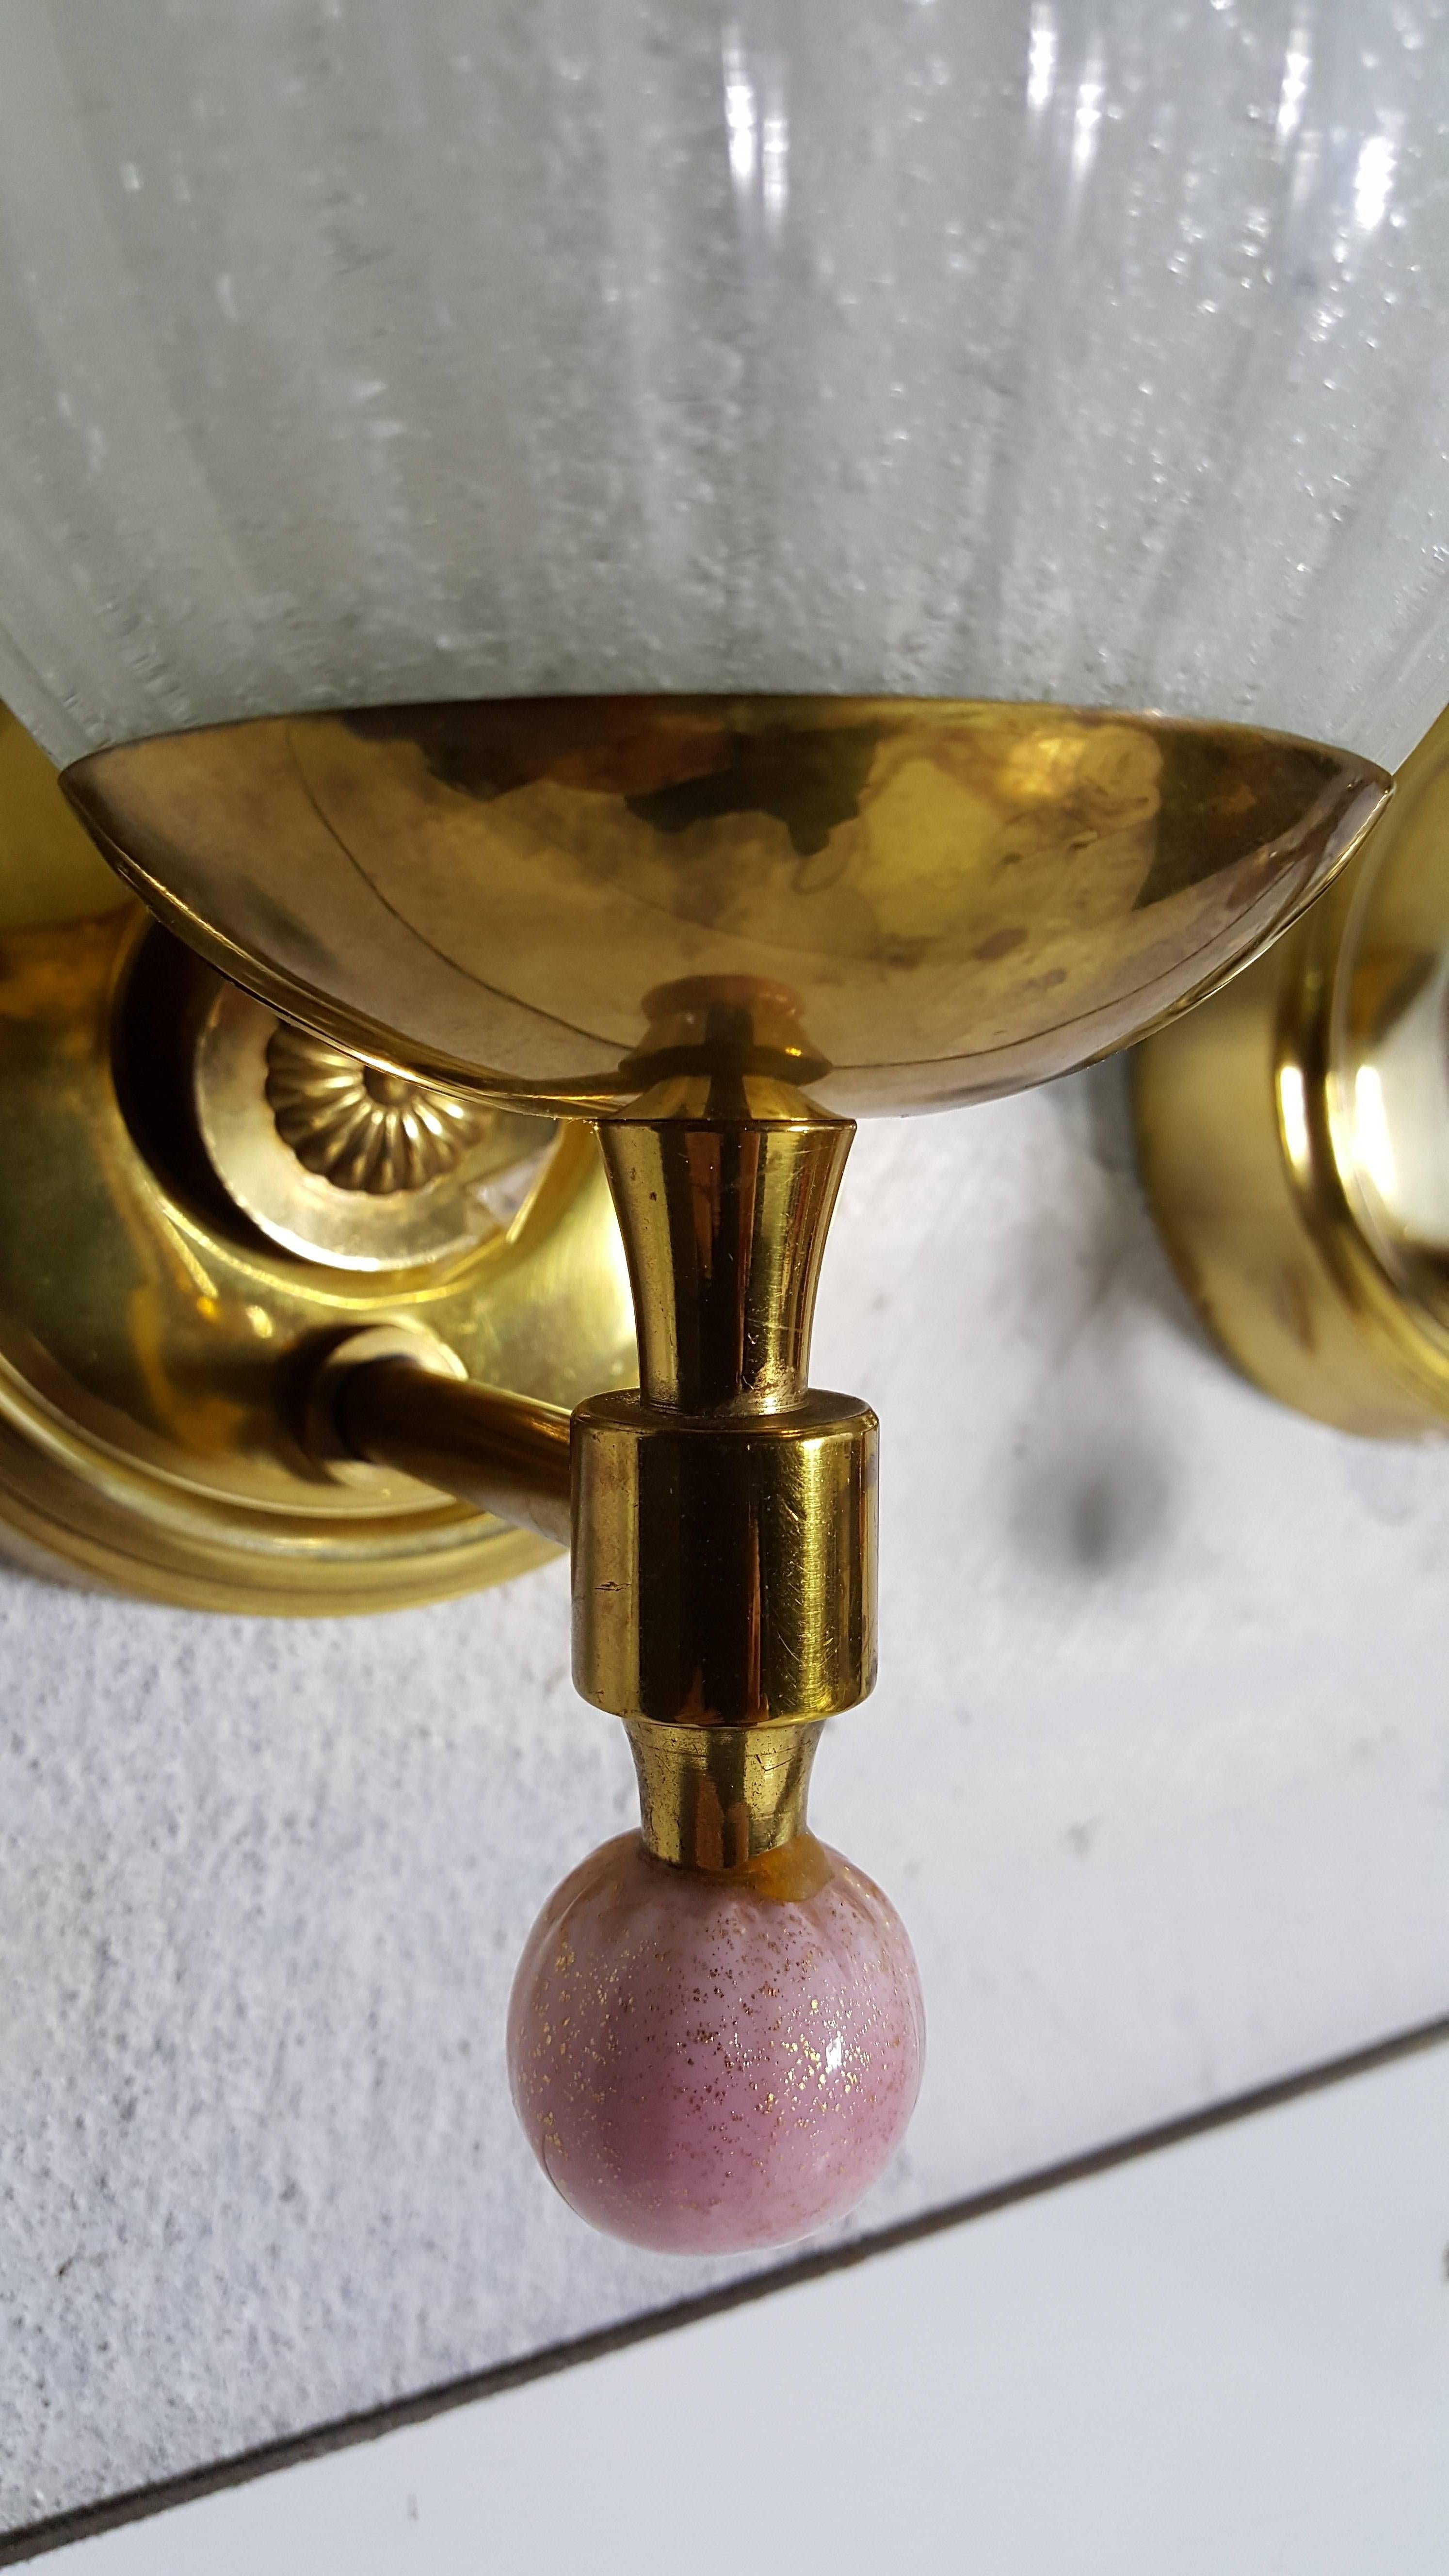 Amazing pair of brass and Murano glass sconces. Brass fixtures made by Lightolier. Blown glass shades and ball finial made by Barovier & Toso. Stunning.